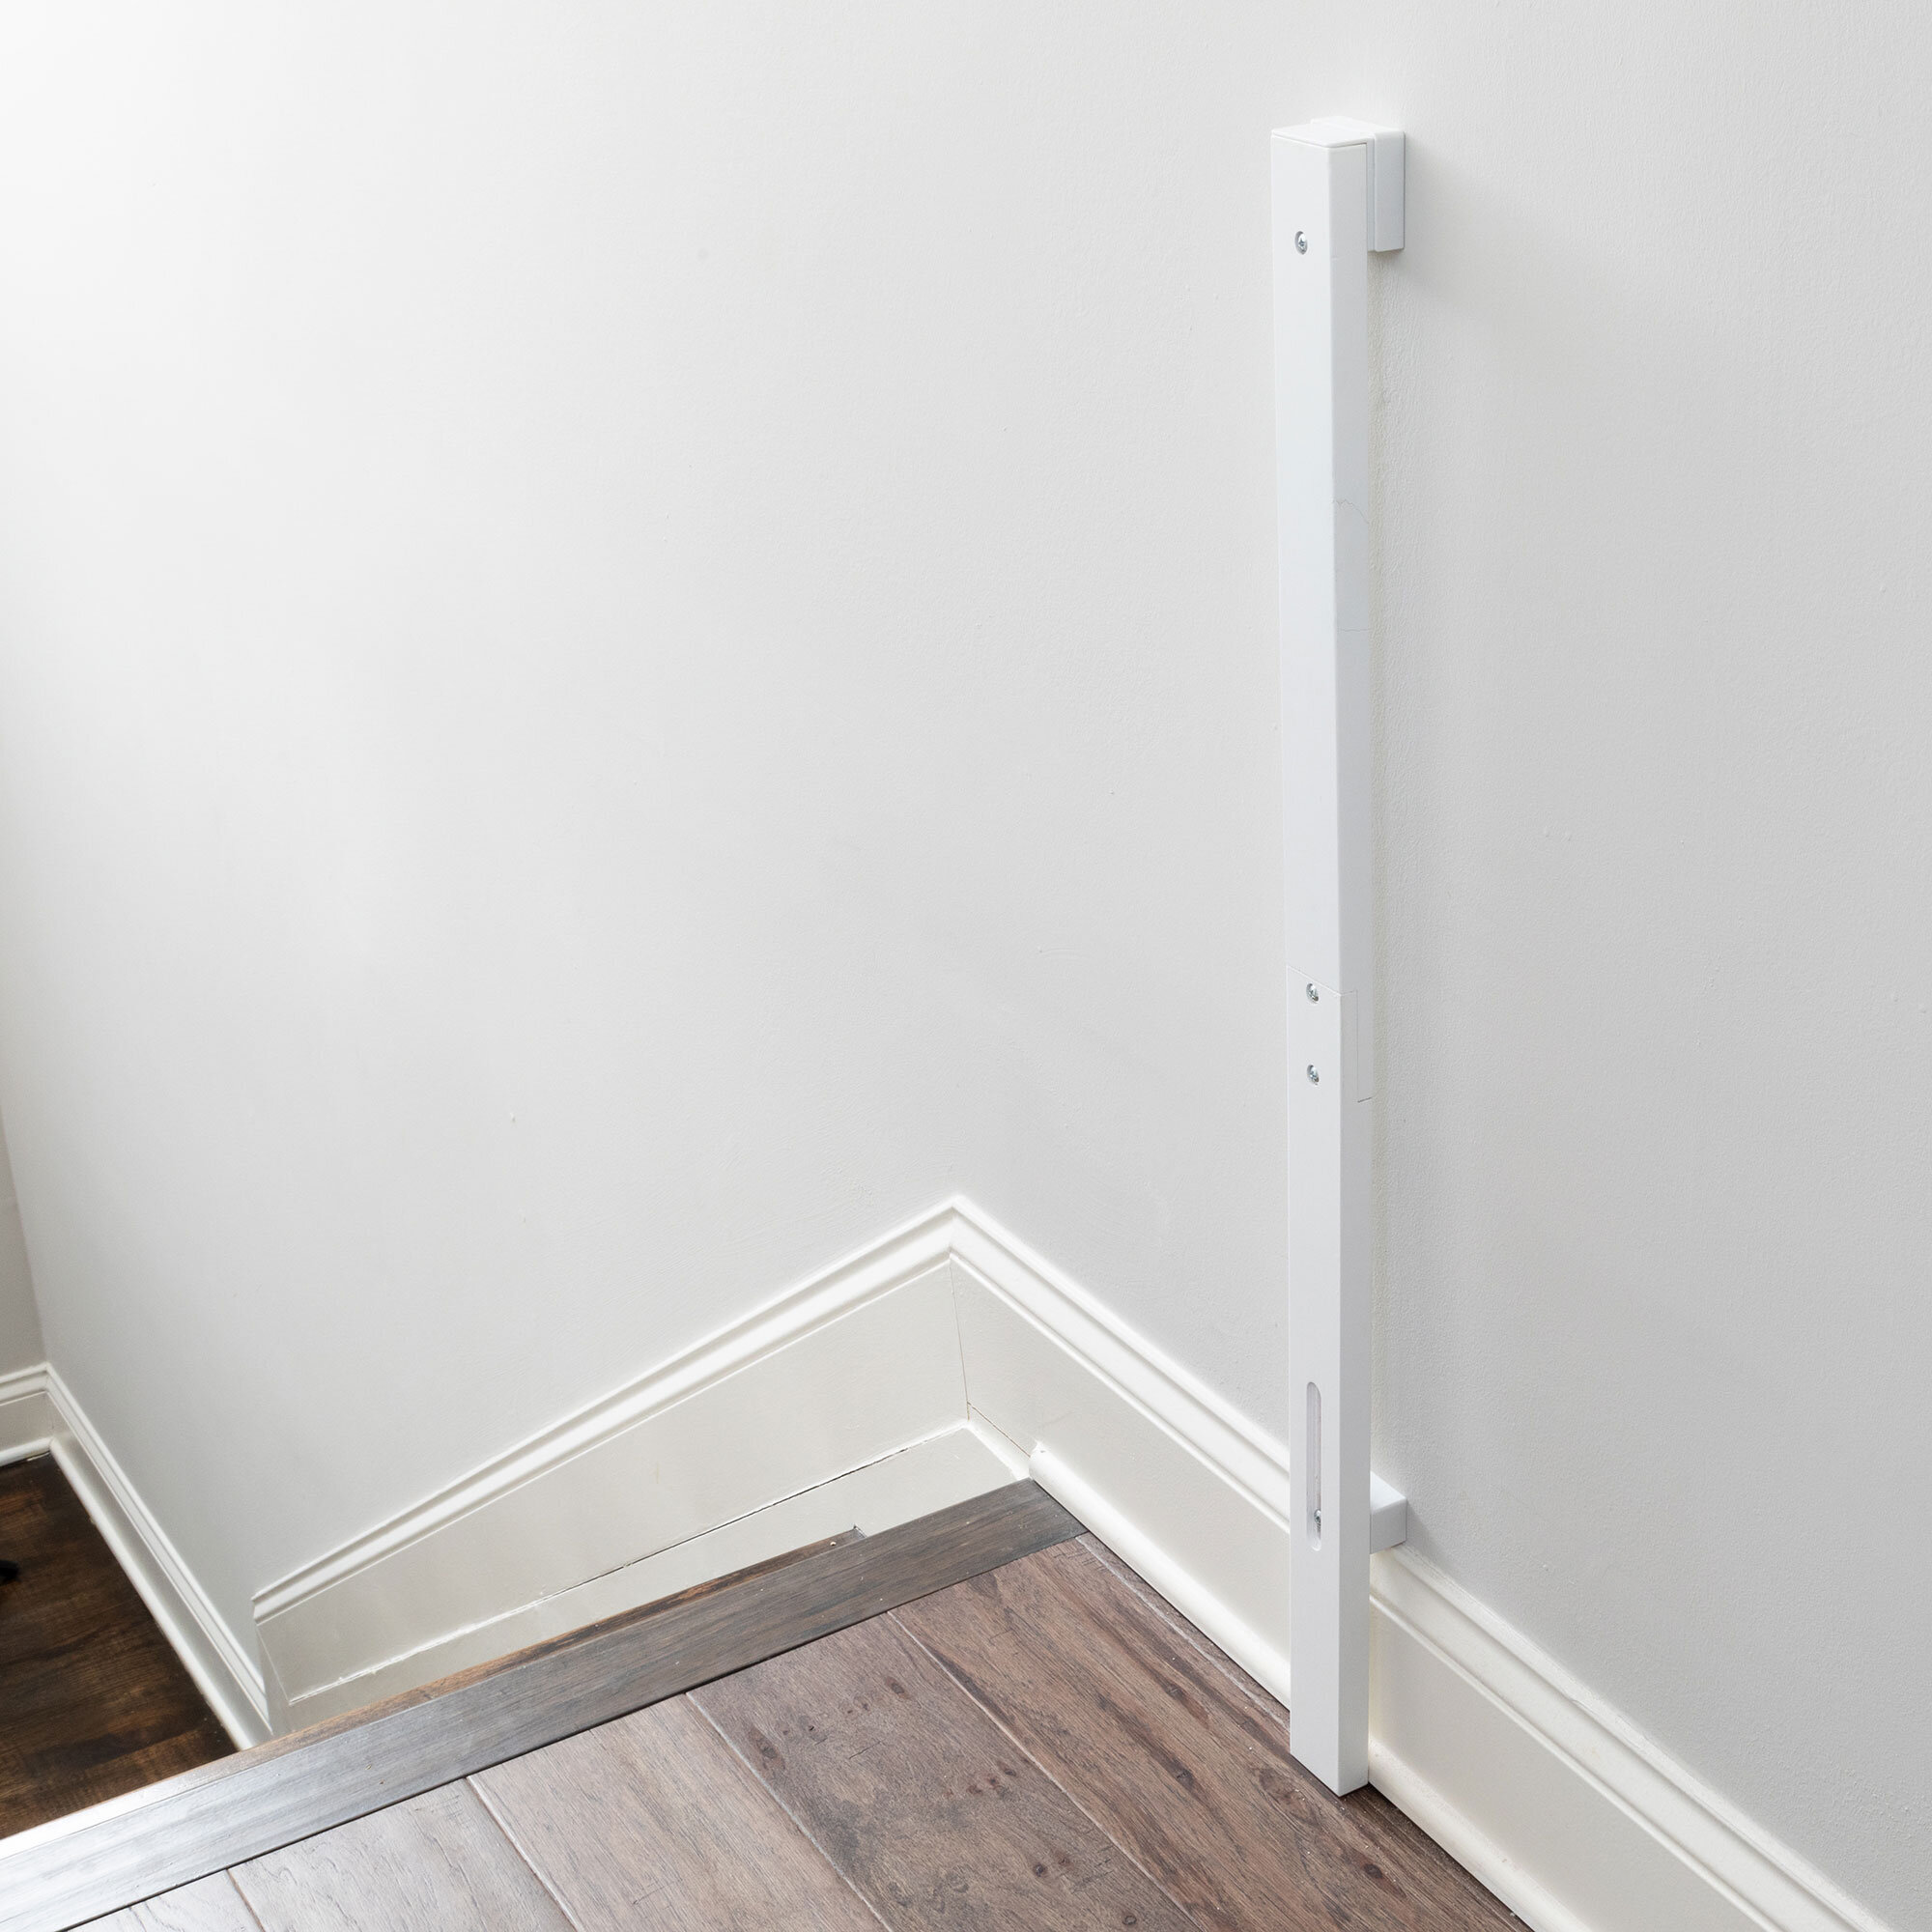 Adhesive Double Door Lock — Qdos Baby Gates Child Safety and Baby Proofing  Products